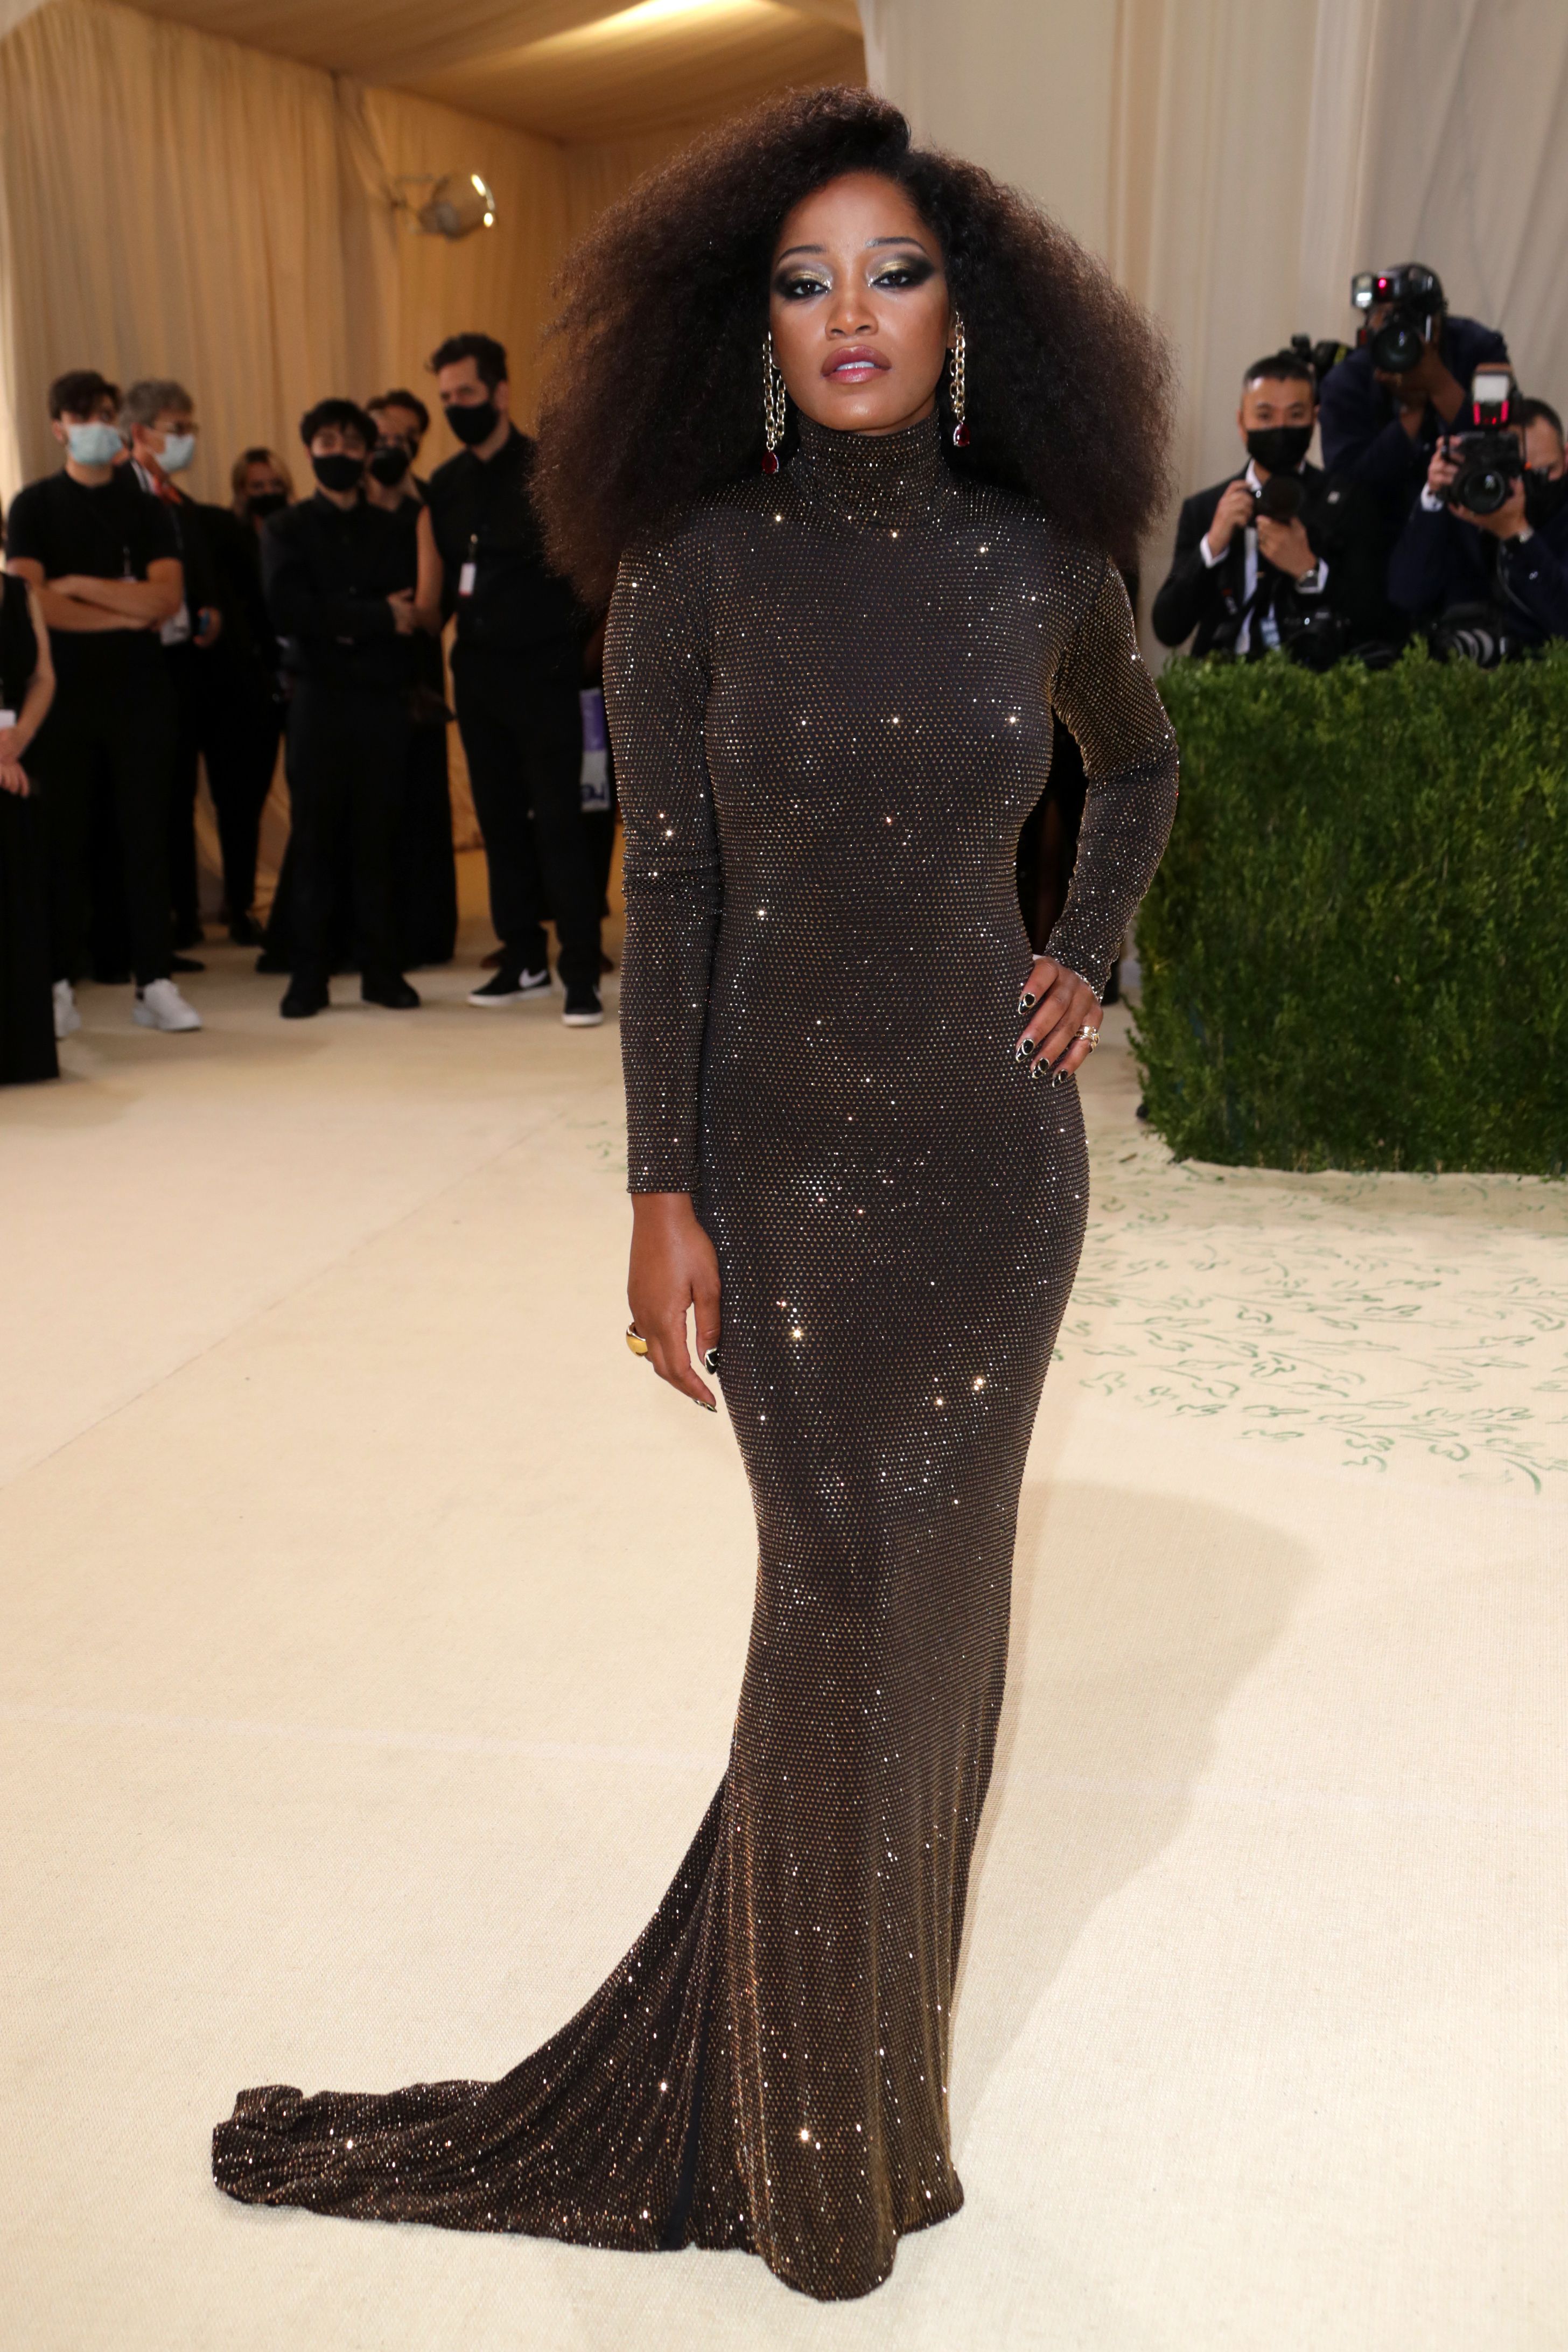 2021 Met Gala Best and Worst Dressed Celebs: Photos | Life & Style